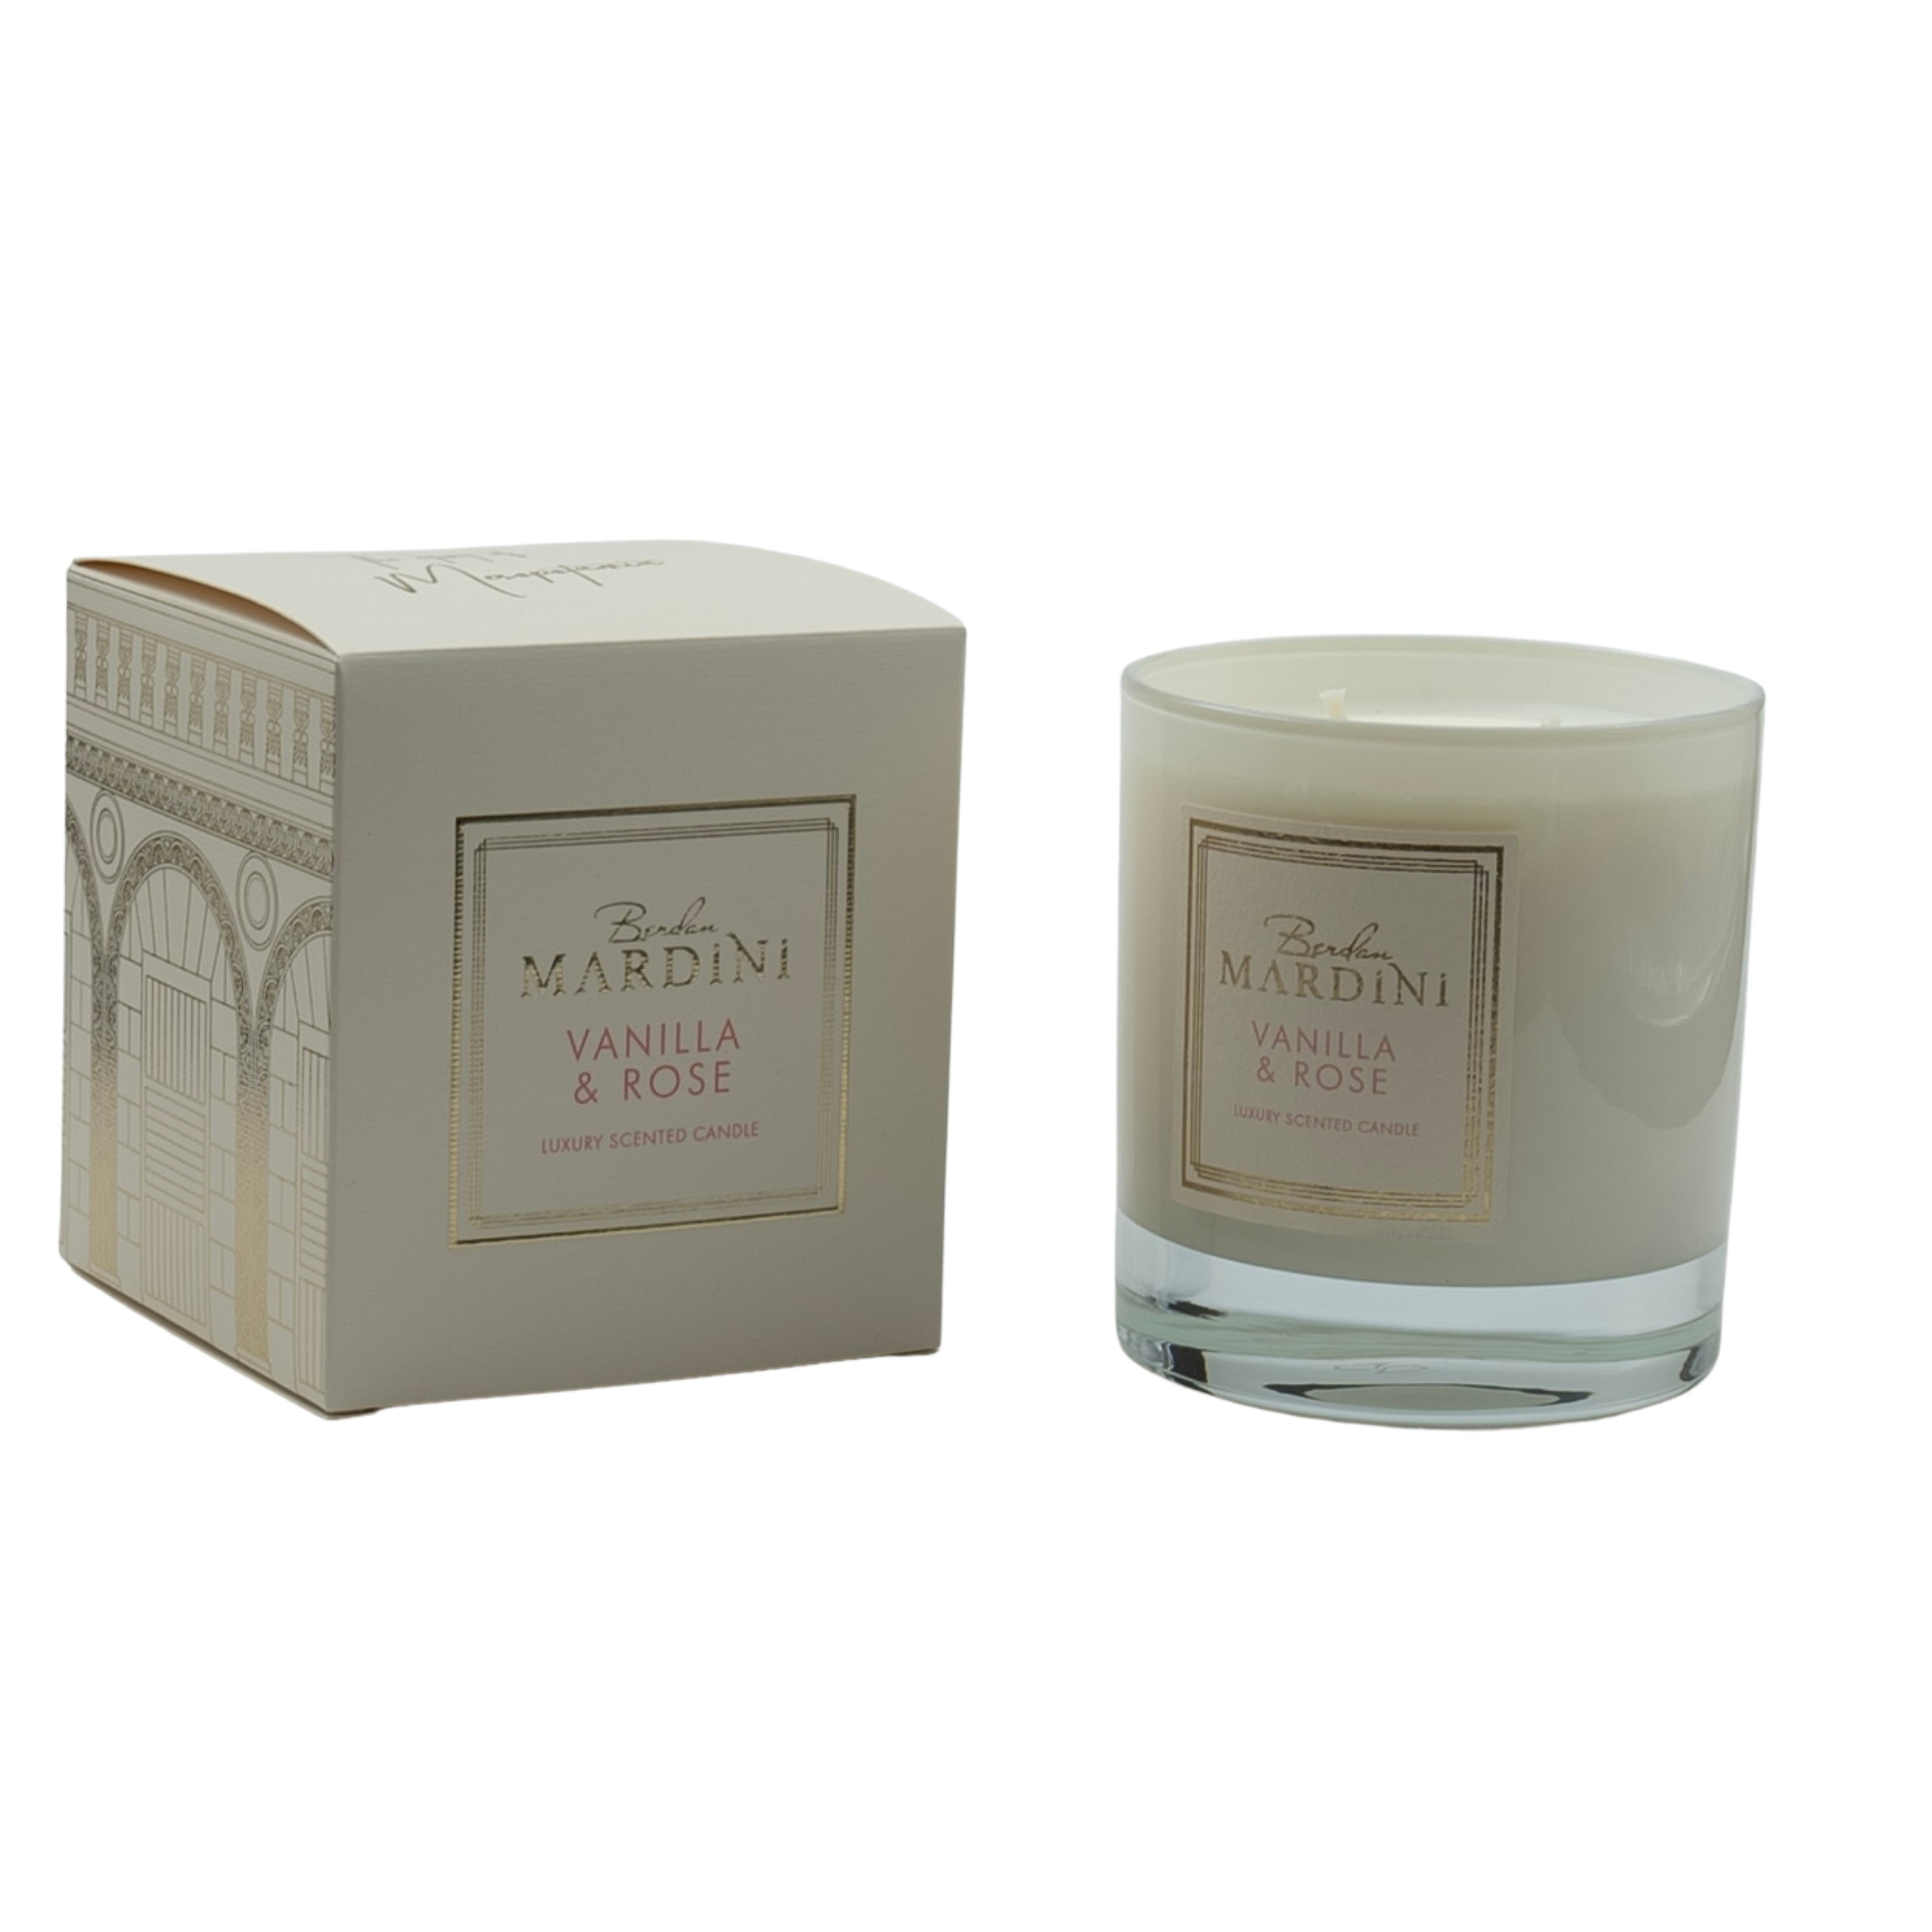 VANILLA&ROSE LUXURY SCENTED CANDLE